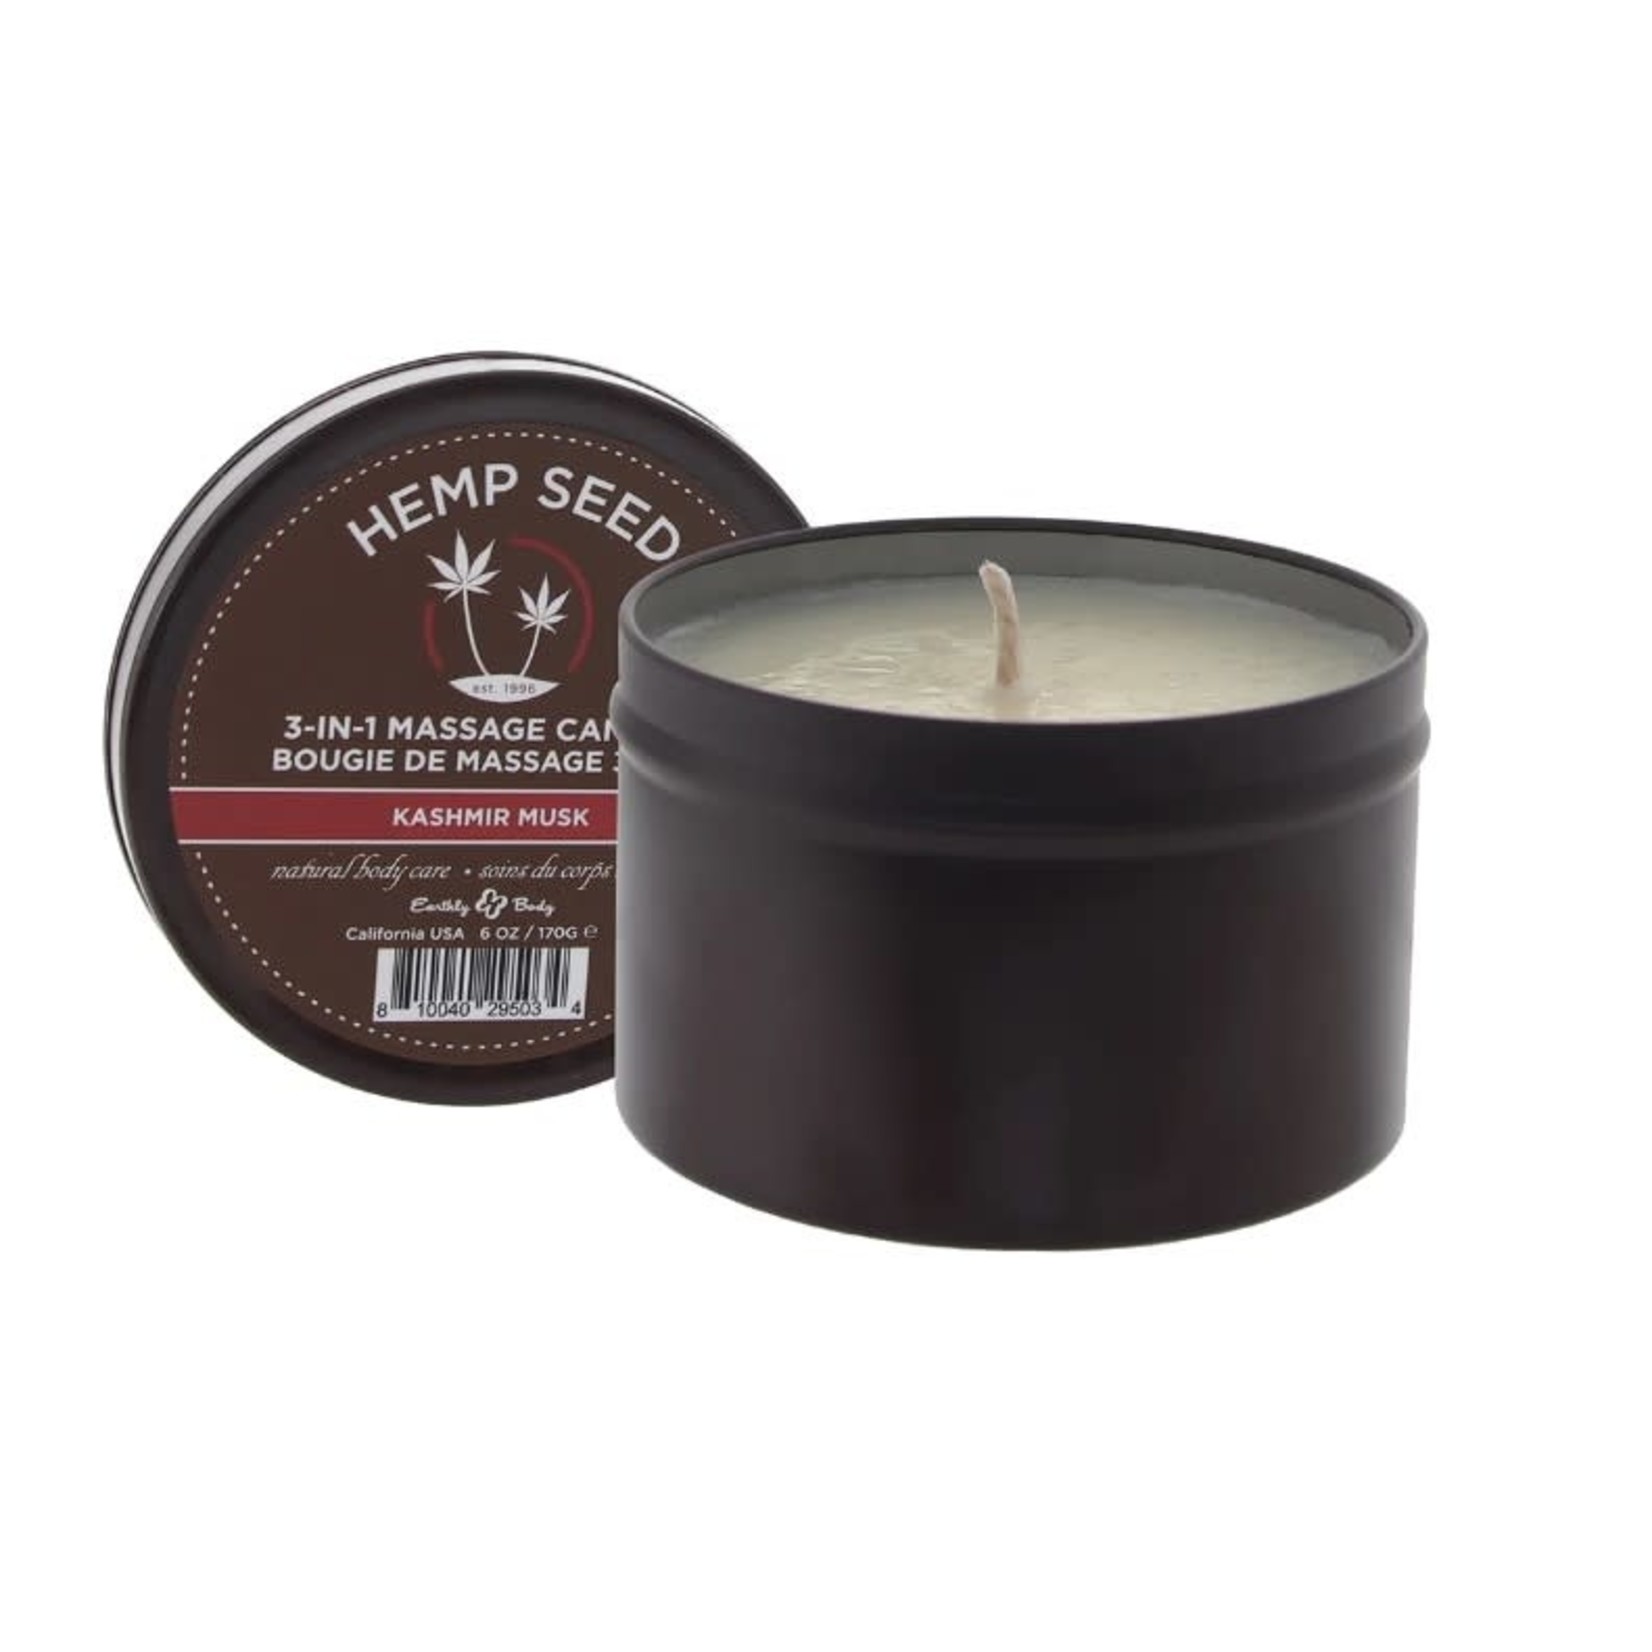 EARTHLY BODY EARTHLY BODY - 3-IN-1 MASSAGE CANDLE 6OZ/170G KASHMIR MUSK